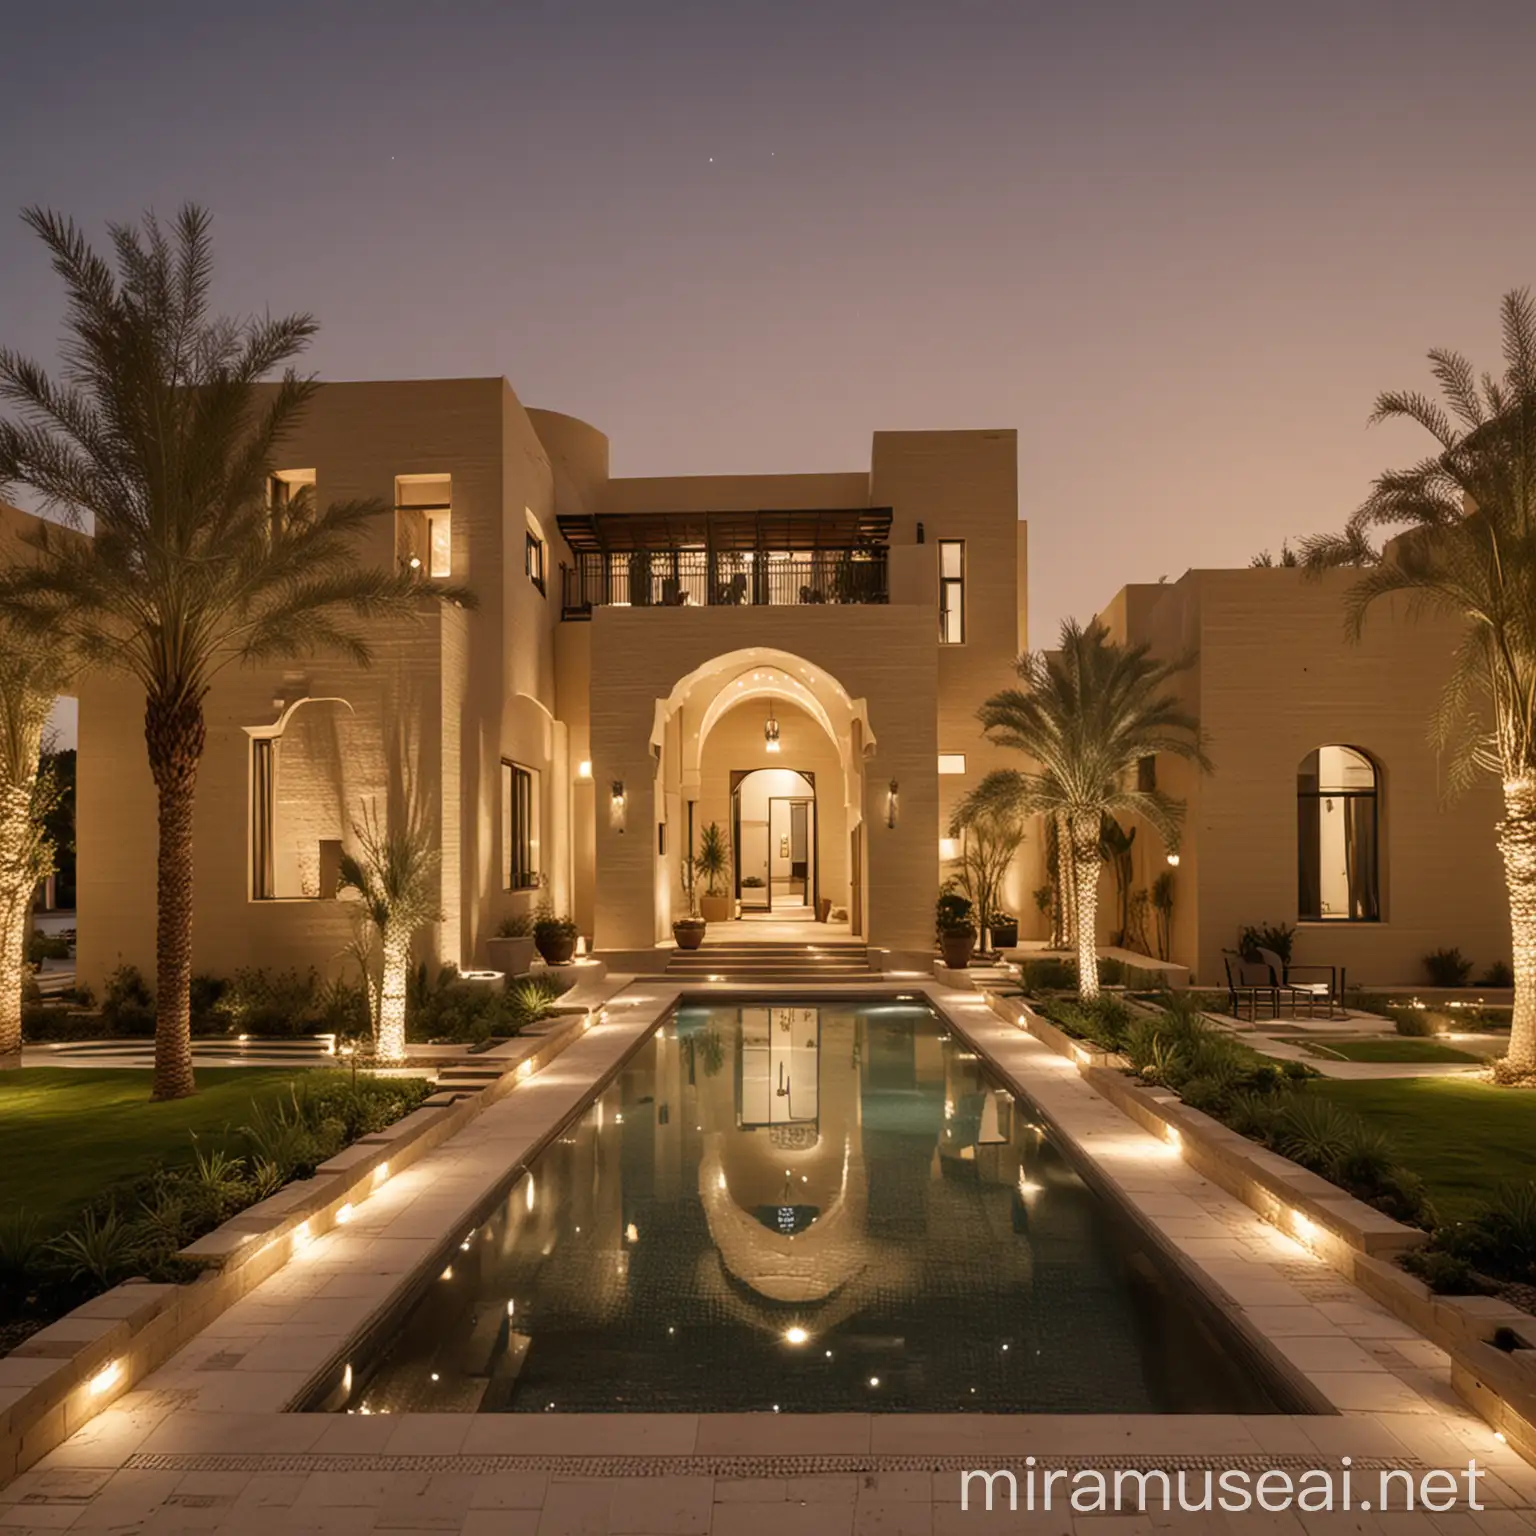 Contemporary Arabian Villa with Illuminated Hedden Lights and Tranquil Water Features